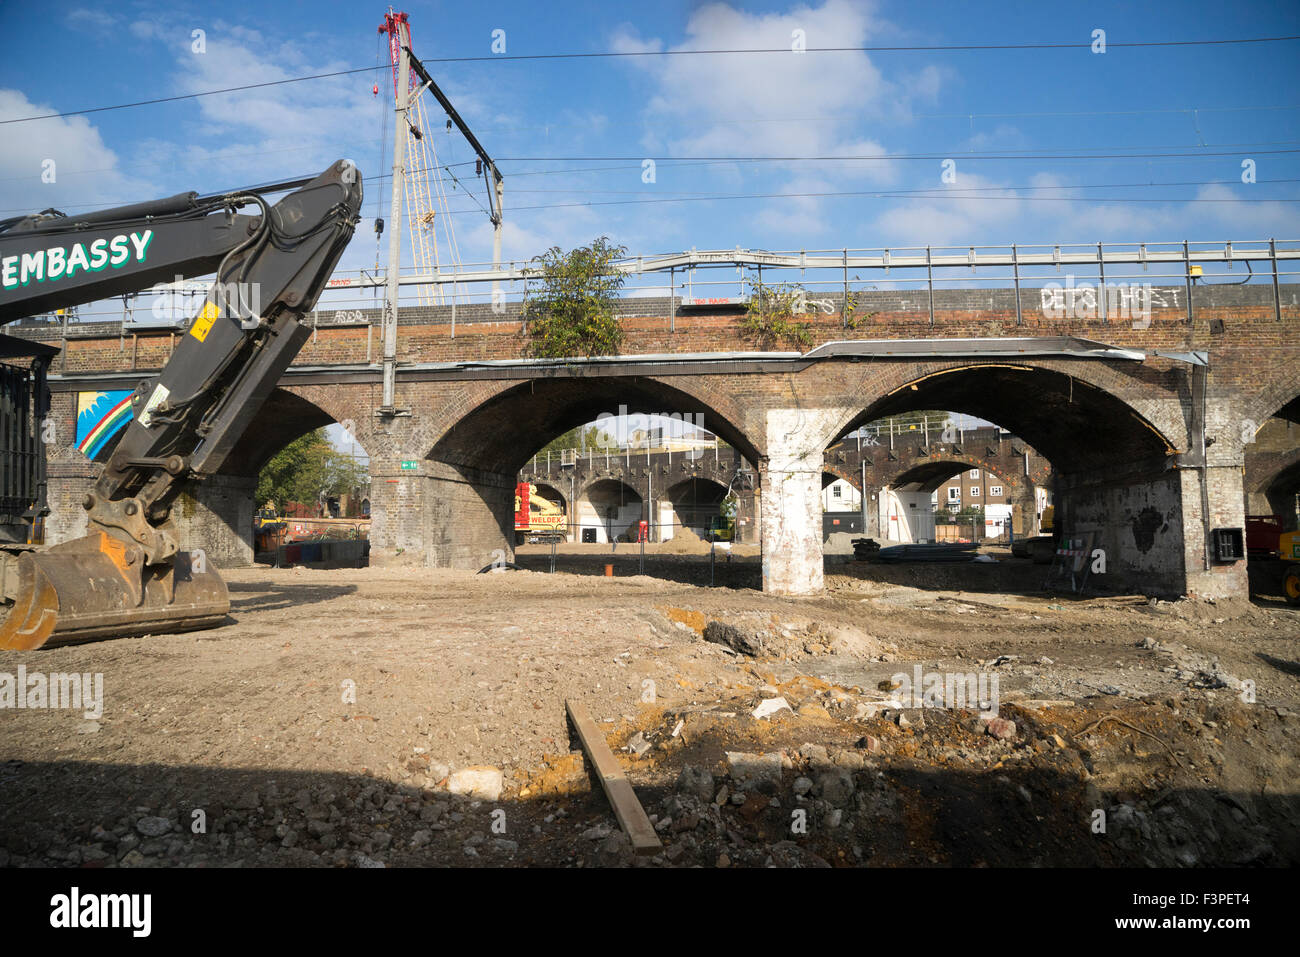 October 2015: Construction work on the redevelopment of the Camden Lock Village commences by the MACE group on behalf of Labtech Stock Photo